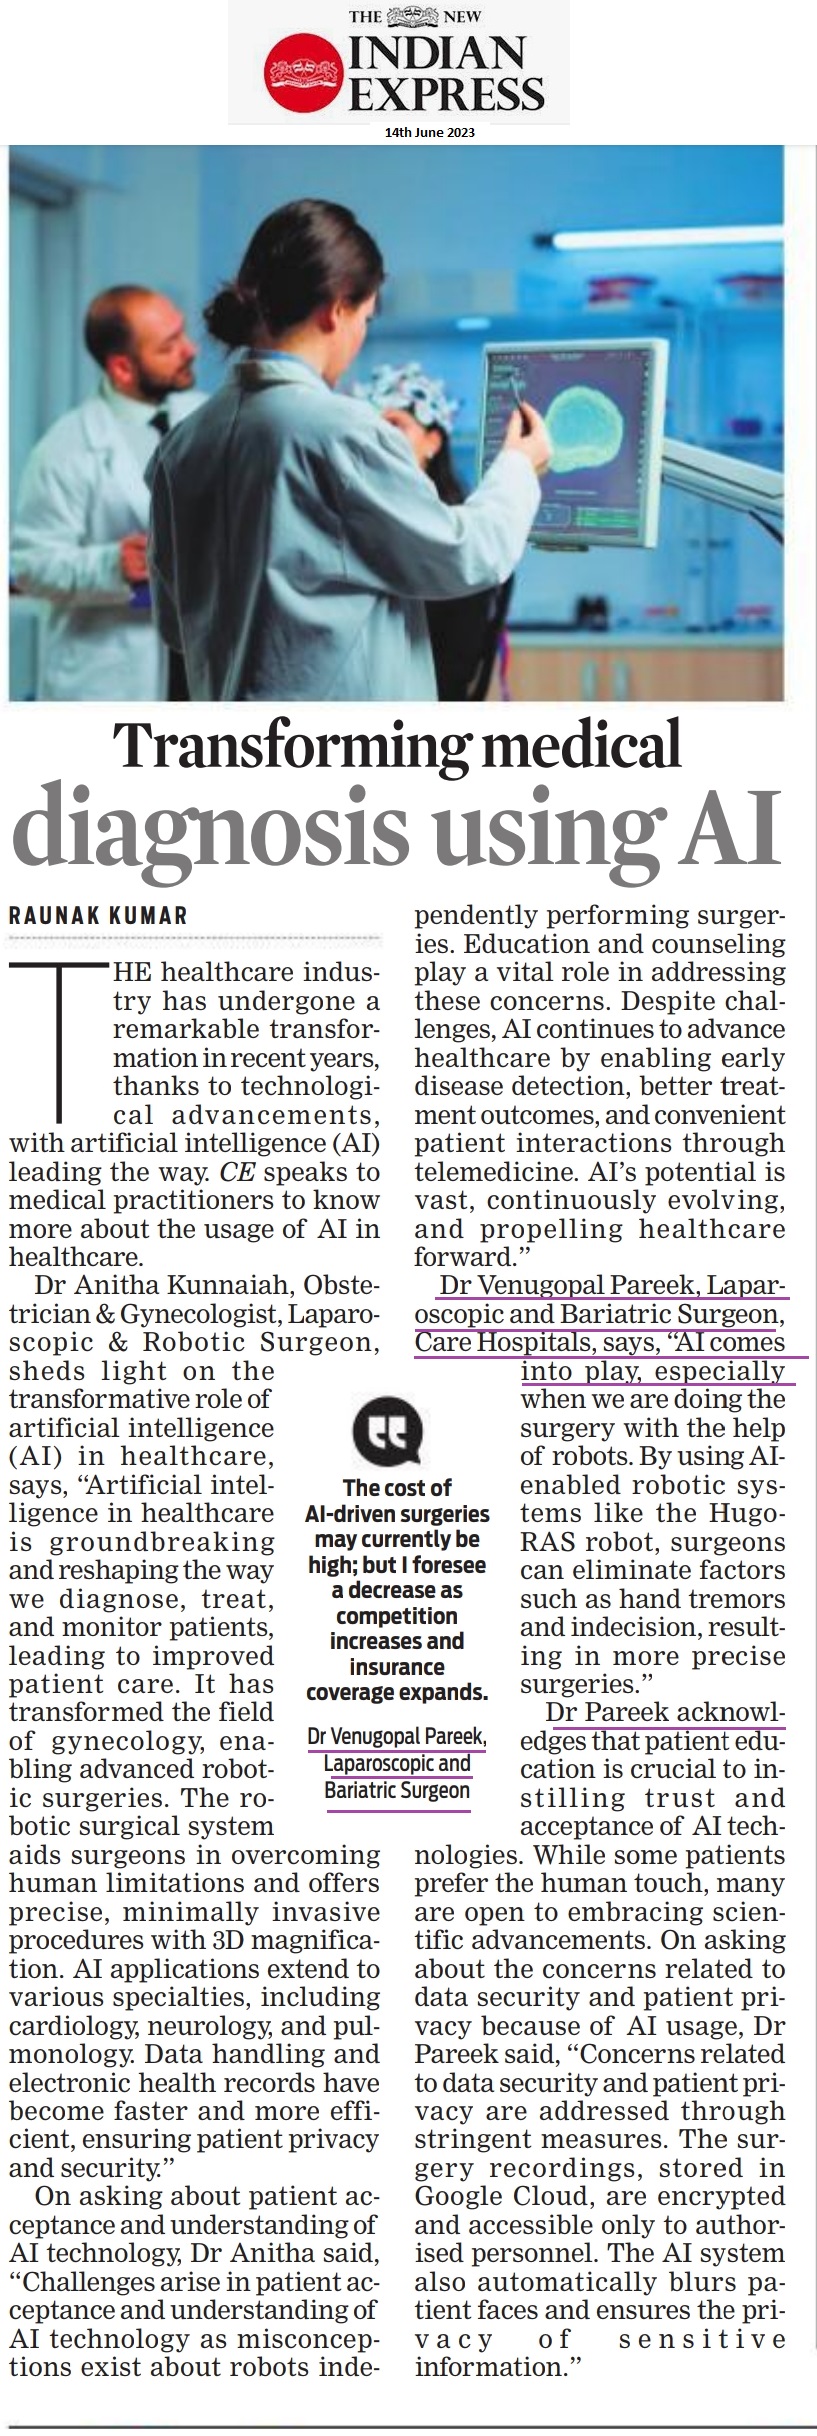 Transforming Medical Diagnosis Using AI News Quote by Dr. Venugopal Pareekh Consultant Laprscopic Bariatric Surgeon CARE Hospitals Banjara Hills in the New Indian Express 